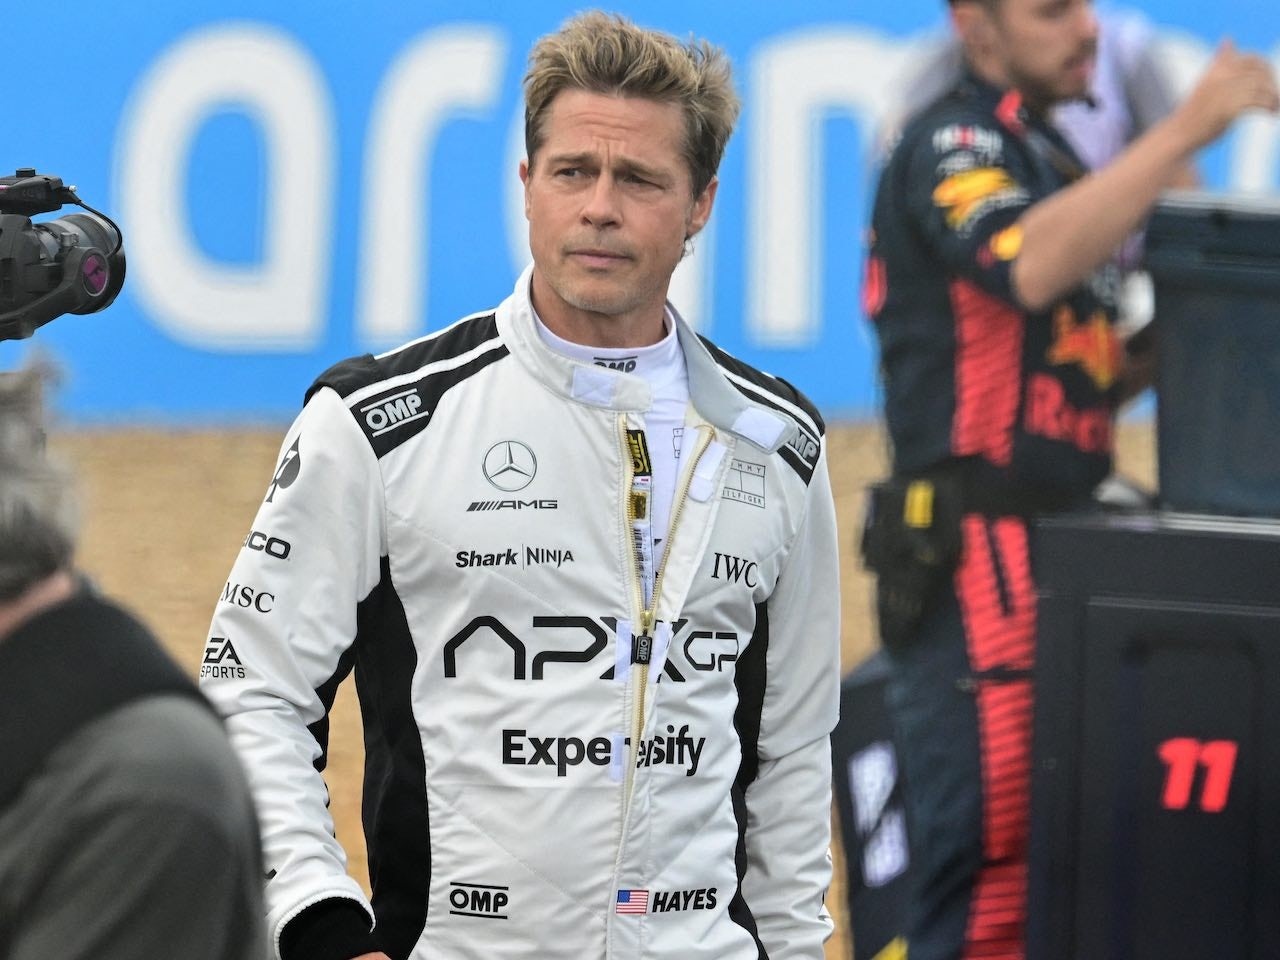 Brad Pitt set for on-track appearance at Spa GP